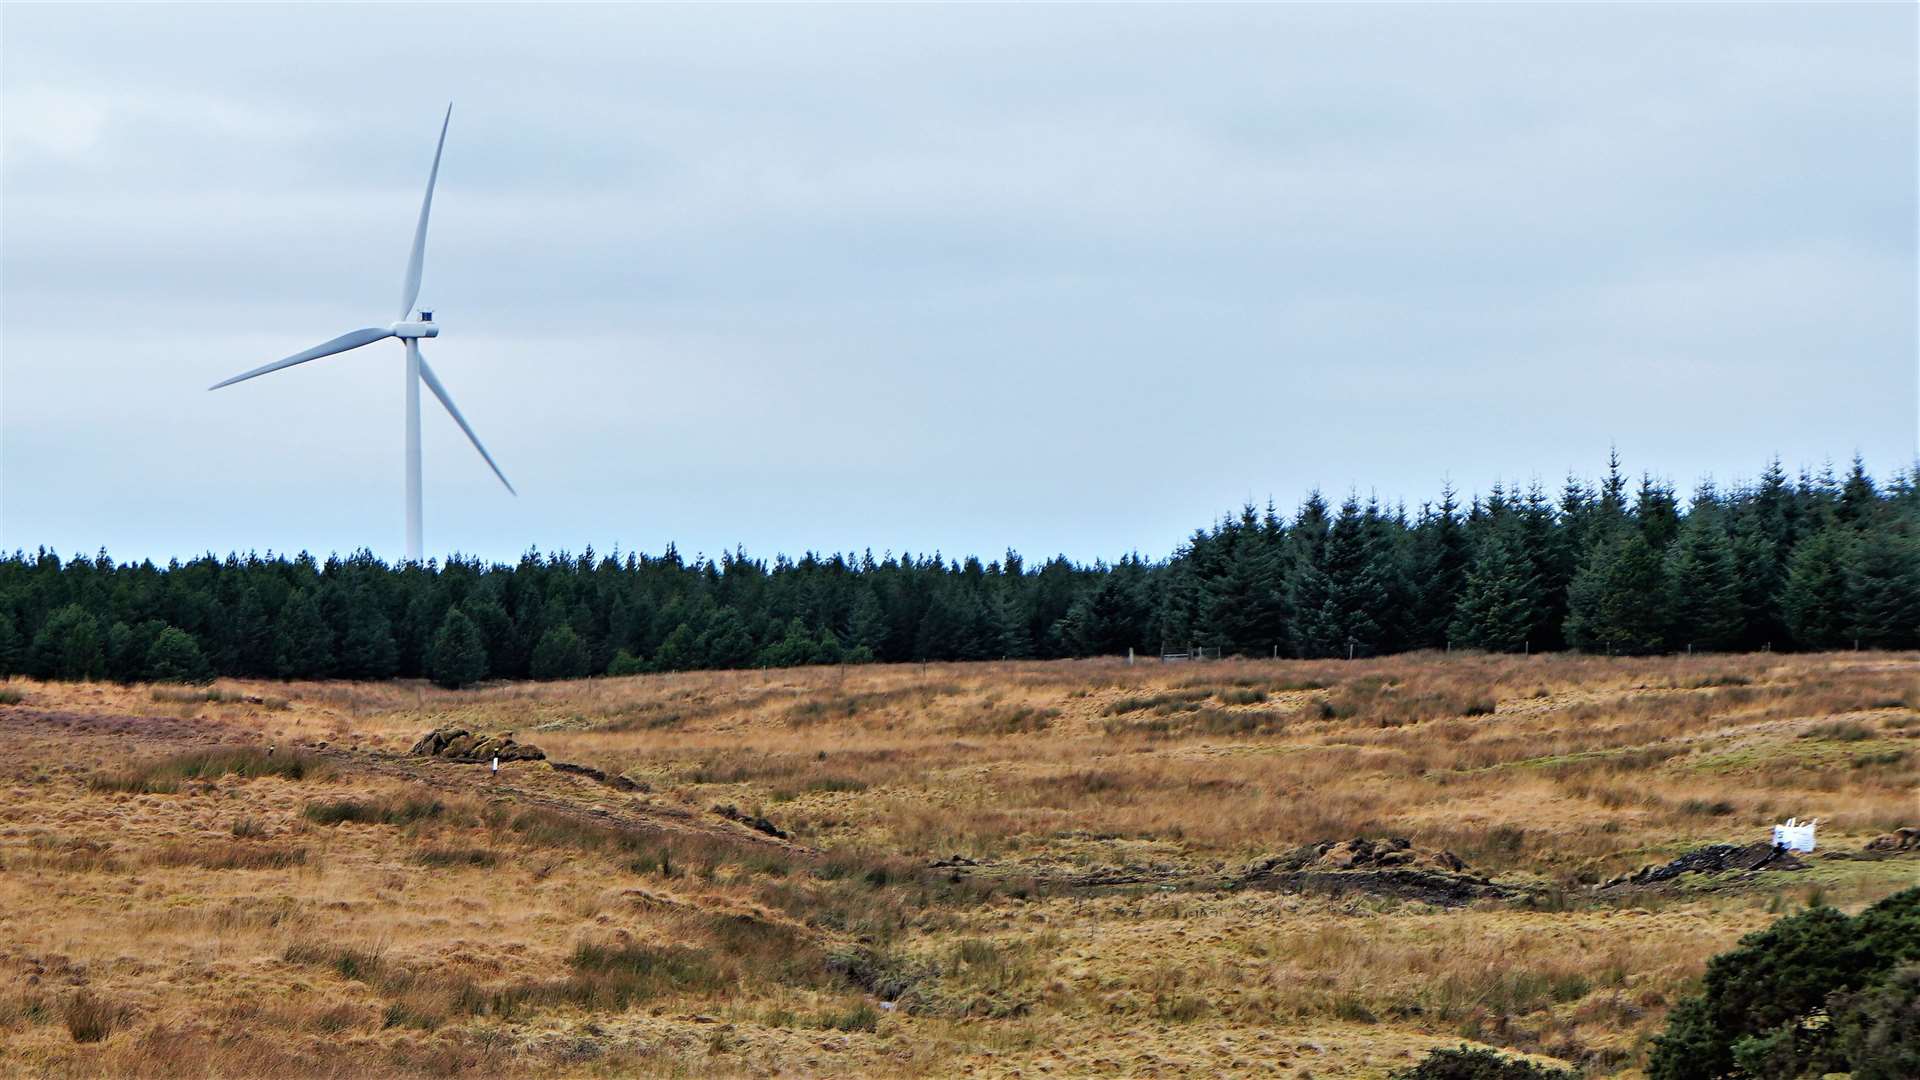 Proposed site of the Watten wind farm with a Halsary turbine visible in the background. The Watten turbines will be 90m higher. Picture: DGS